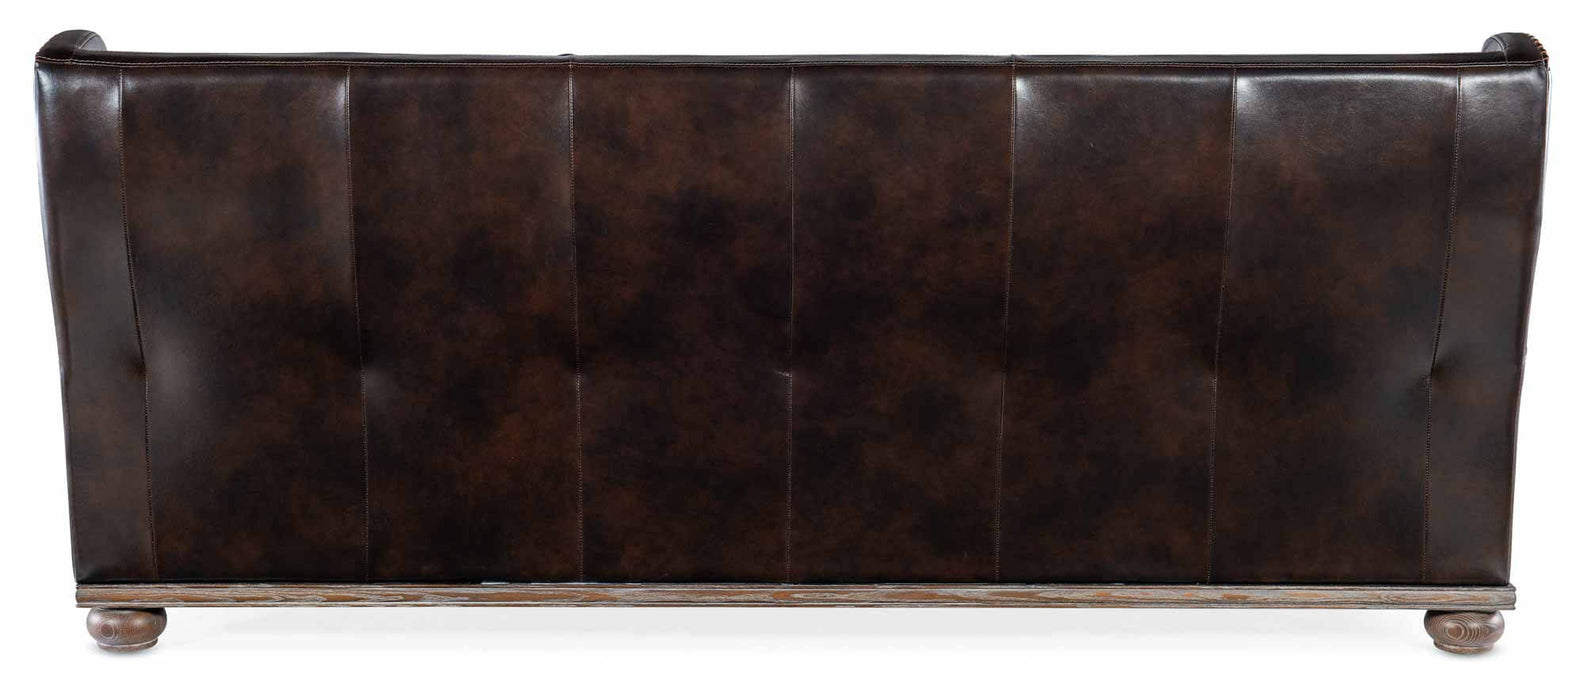 Loops Leather Sofa In Brown